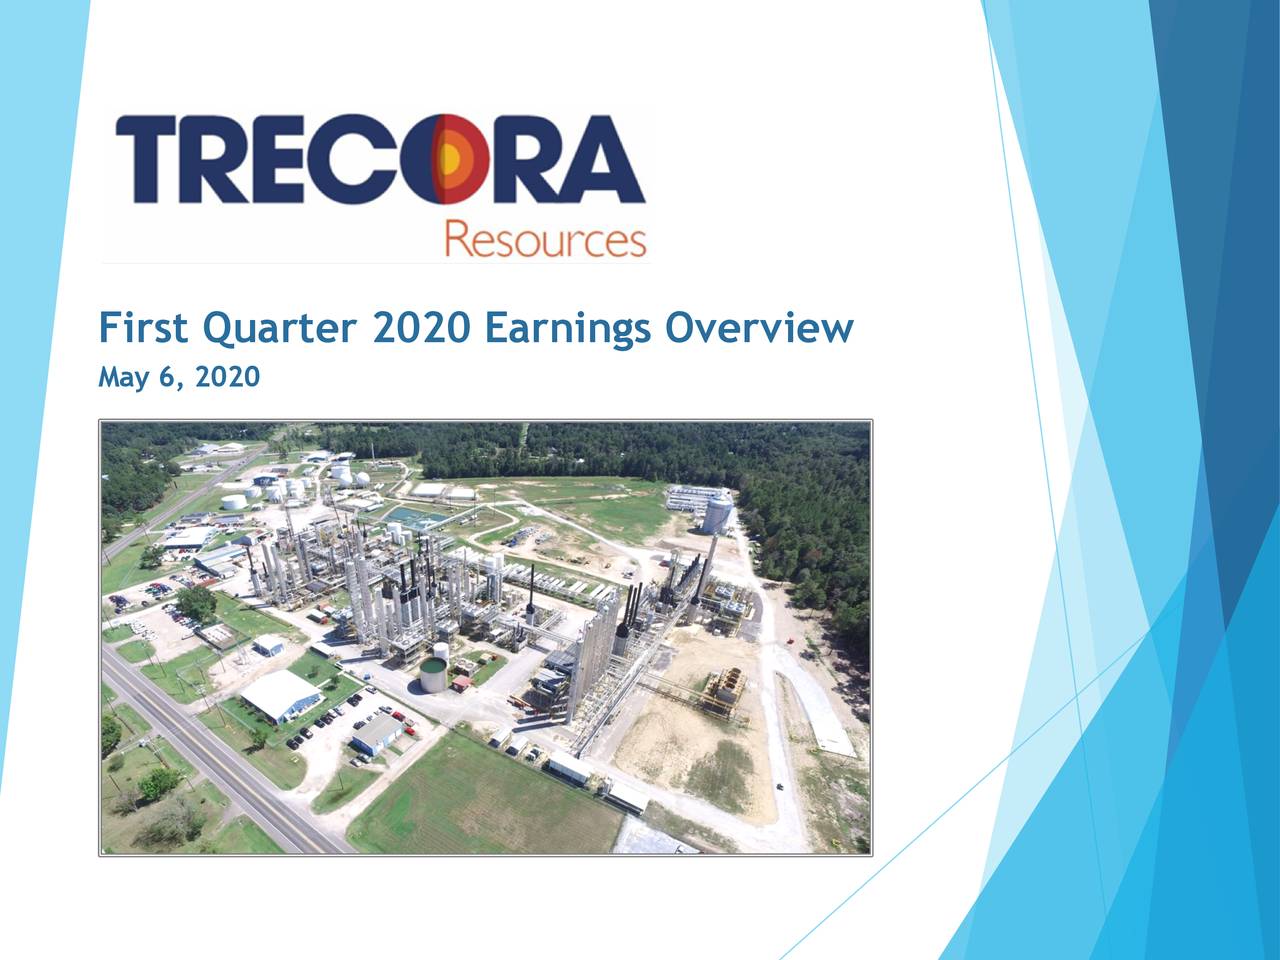 First Quarter 2020 Earnings Overview